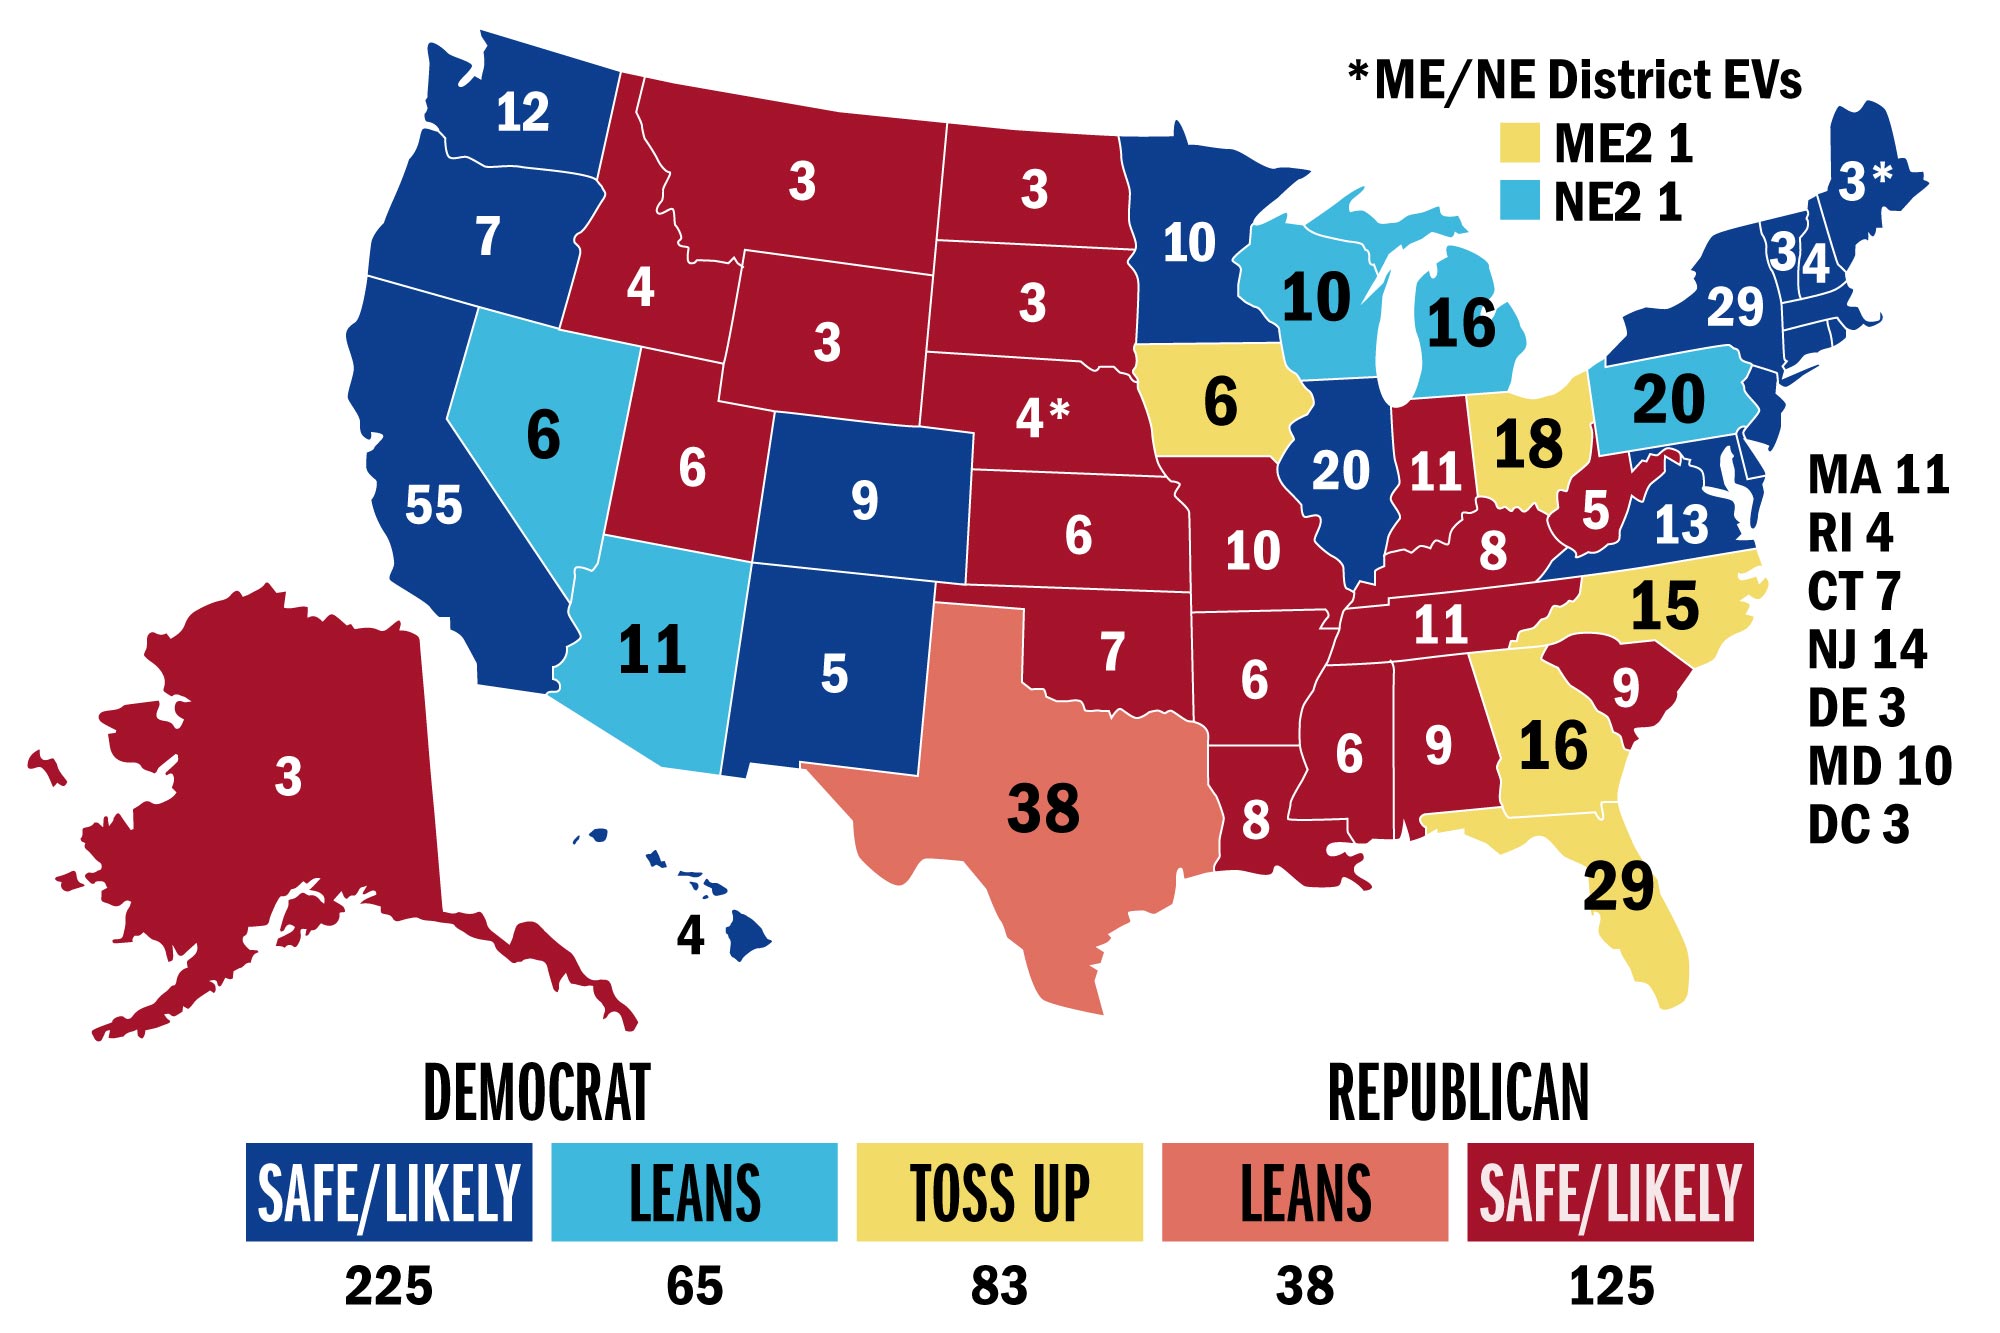 U.S. map showing 225 Electoral College votes as safely Democrat, 65 as leaning Democrat, 83 as toss-ups, 38 as leaning Republican, and 125 as safely Republican.